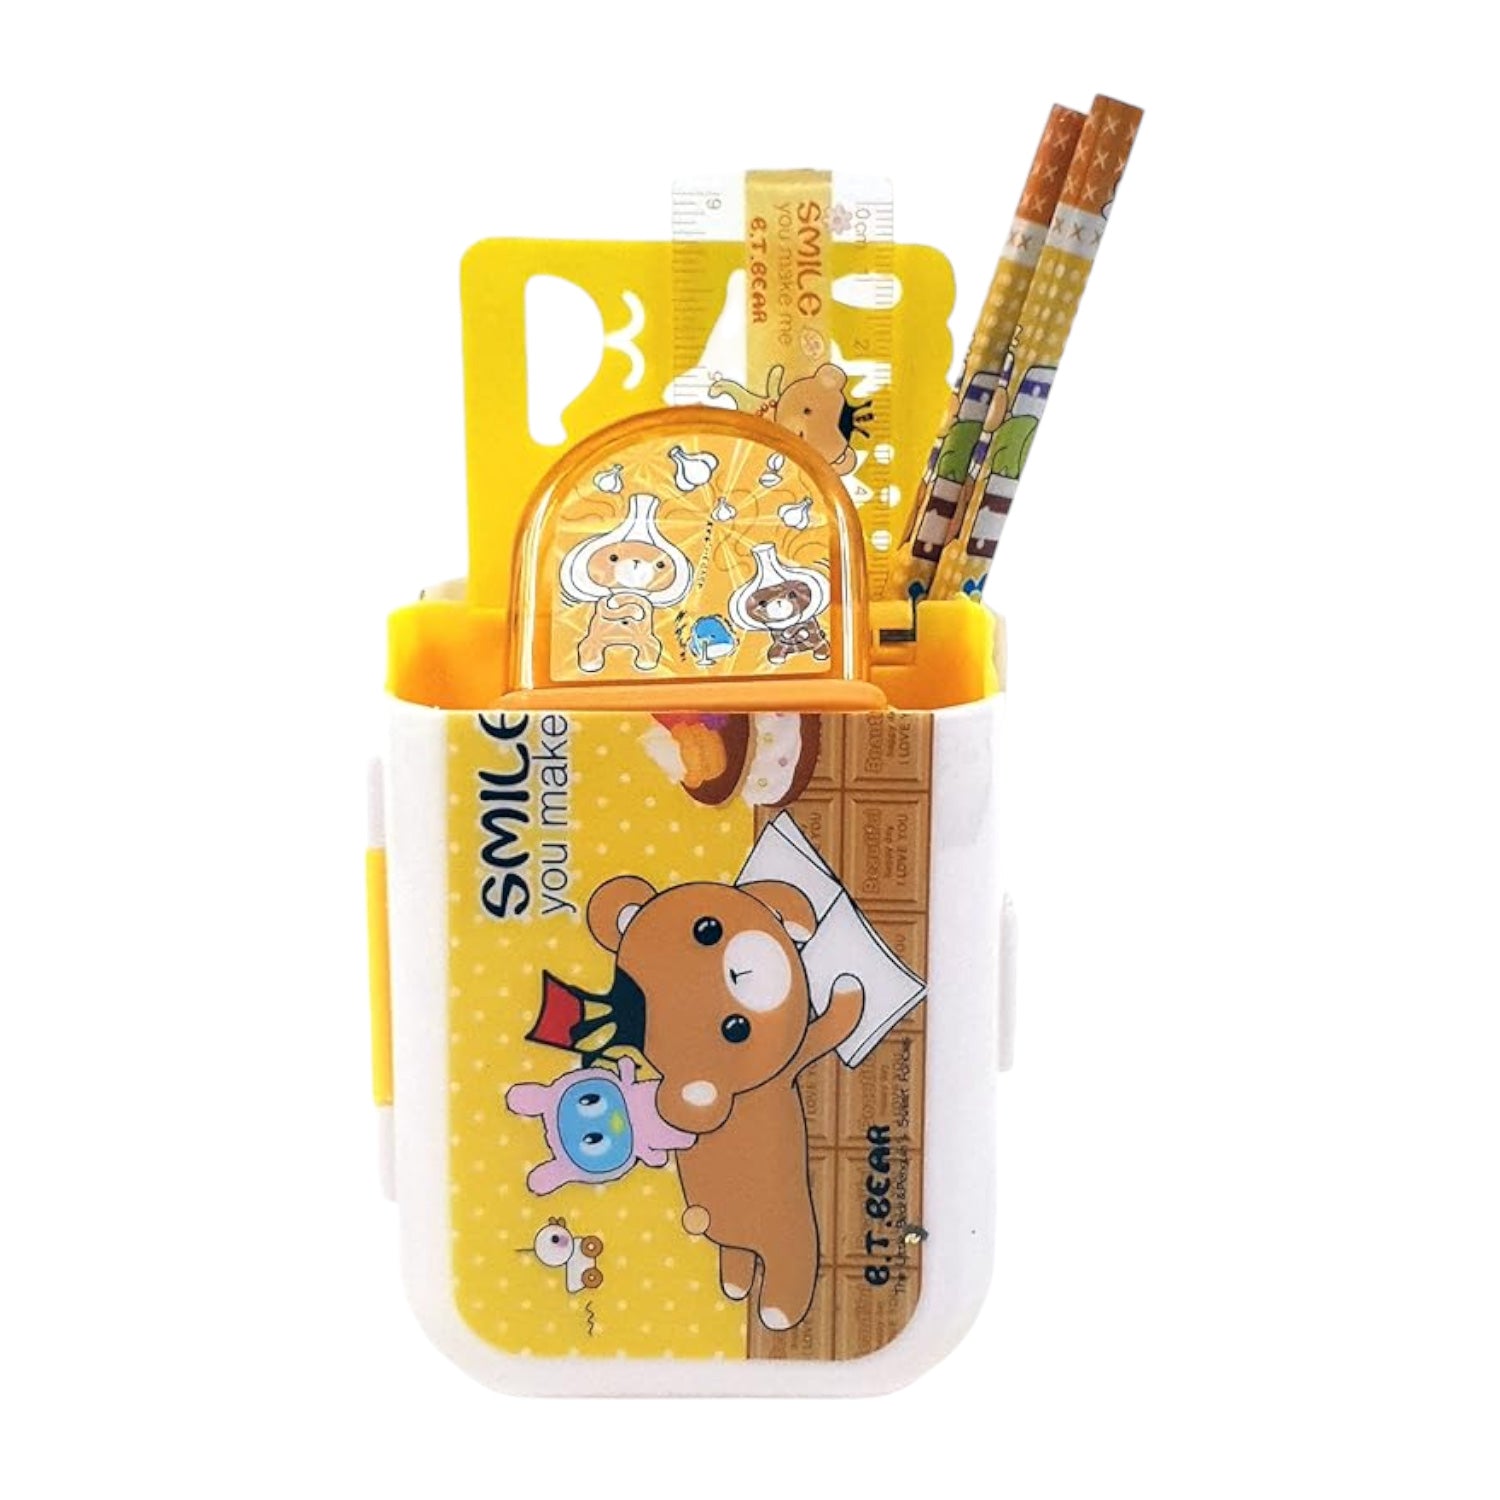 Stationery kit - Yellow Foldable Box with Stationary Items -for Kids, Children, Student, Office, Return Gifts - apkamart